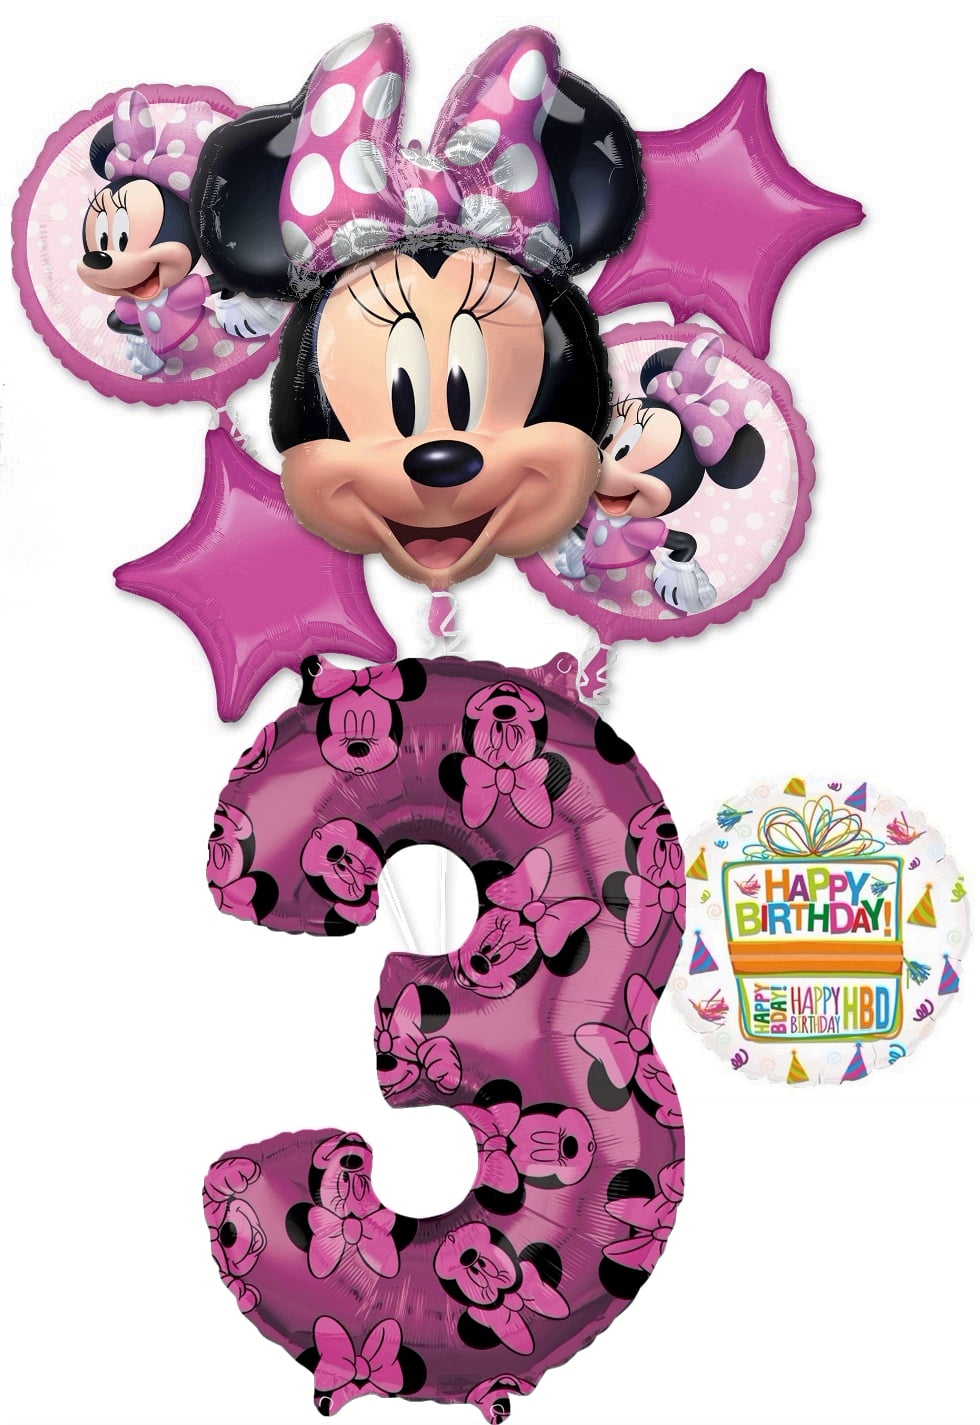 Minnie Mouse #2 2nd Second Happy Birthday Balloon Party Set Mylar Latex Disney by Anagram